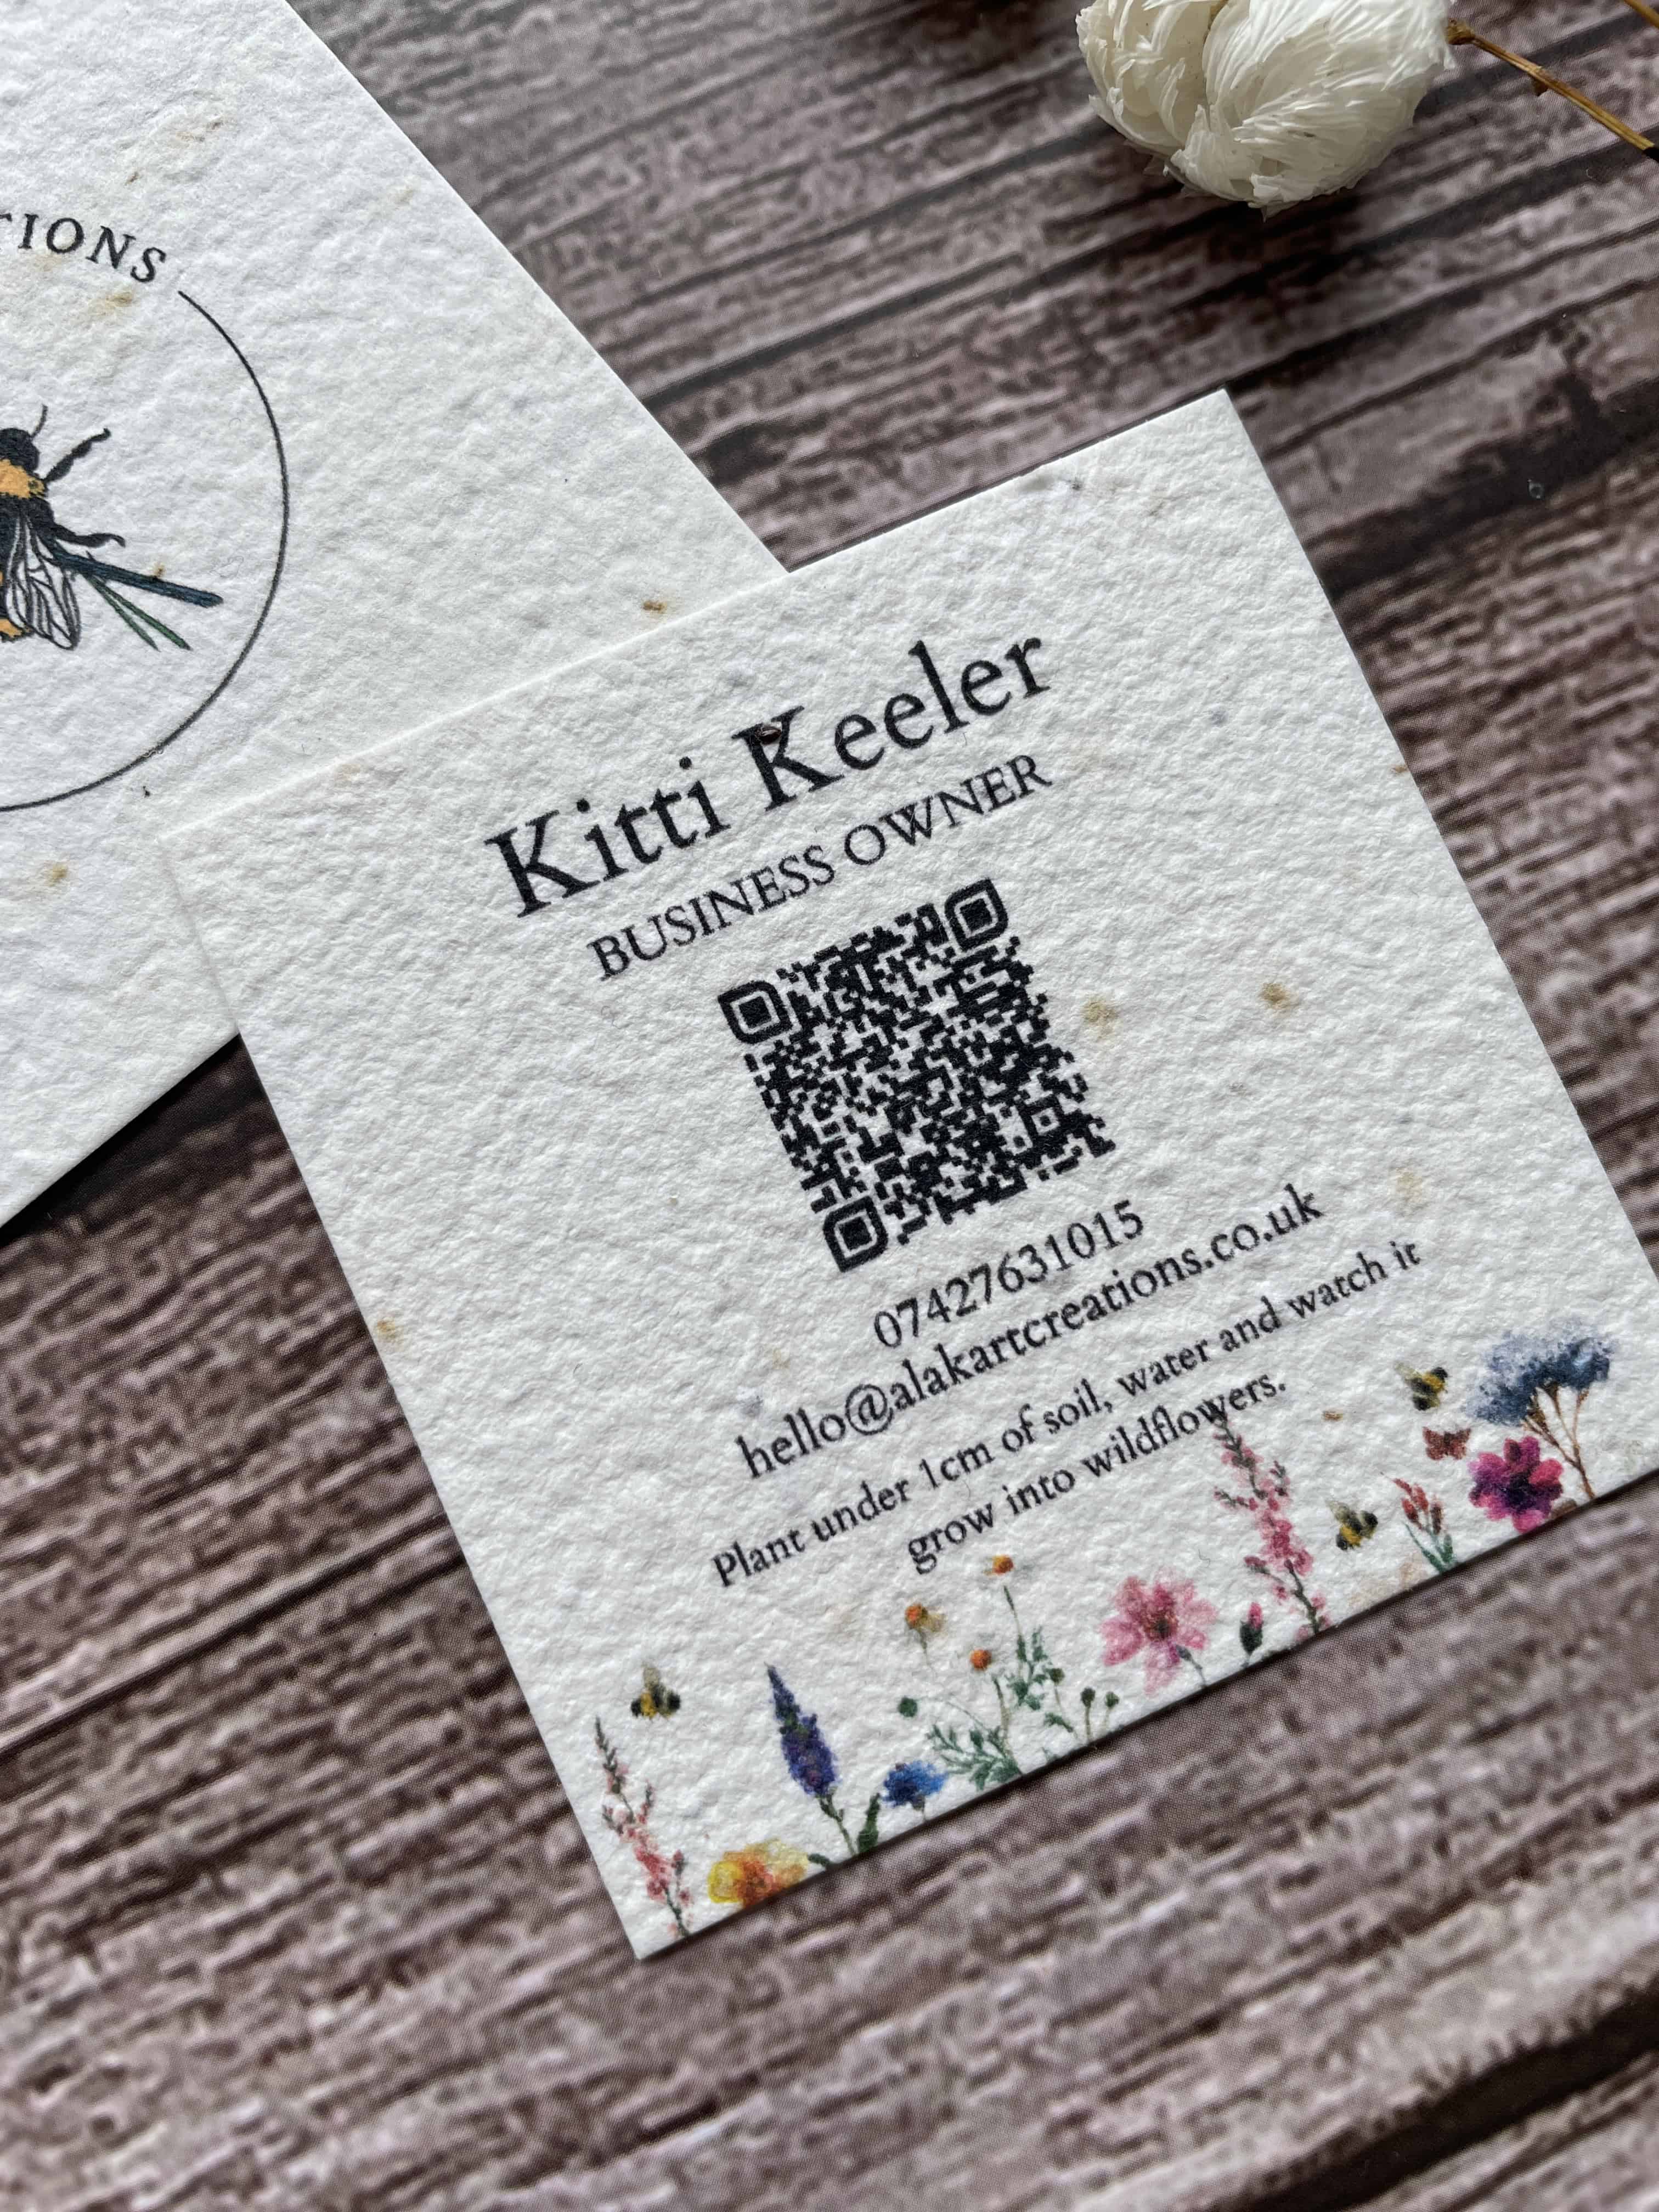 square shaped plantable seed paper business card with QR code